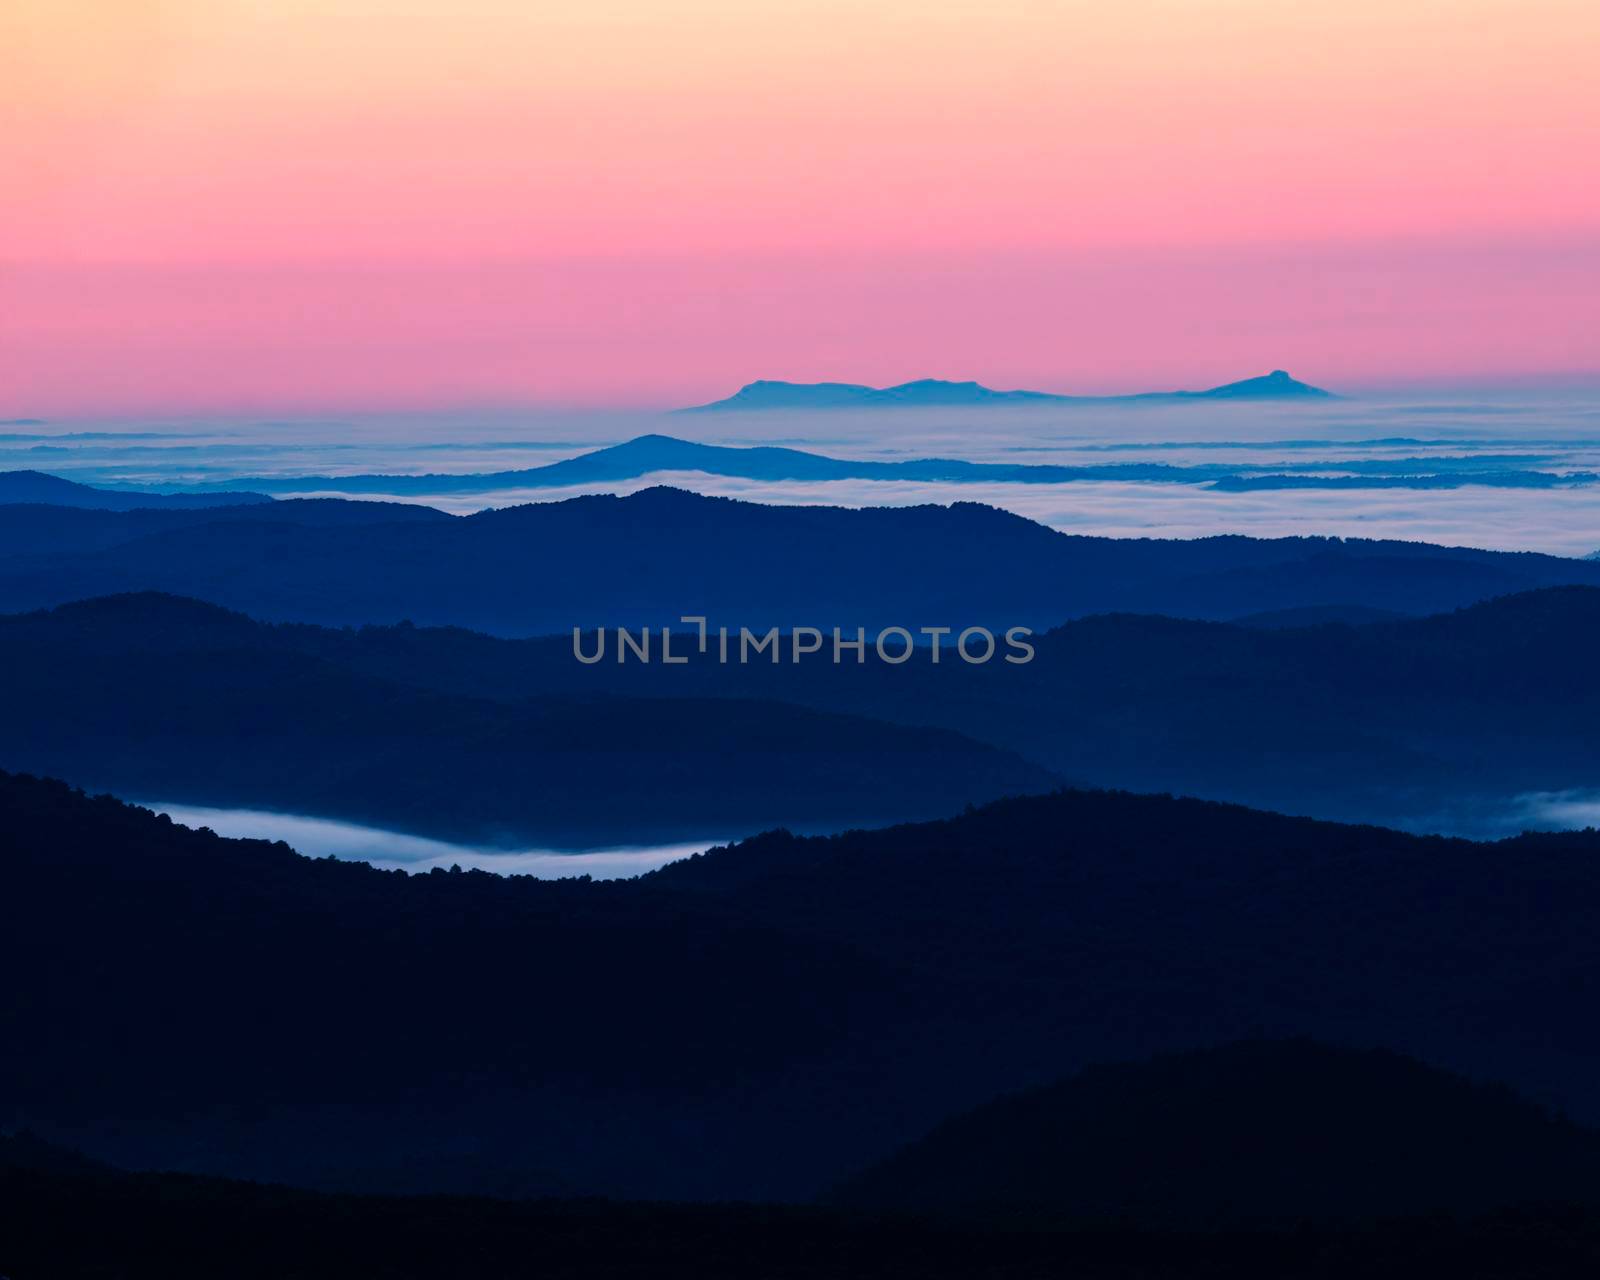 Mountains rise above the clouds in predawn light as seen from the Blue Ridge Parkway in North Carolina.